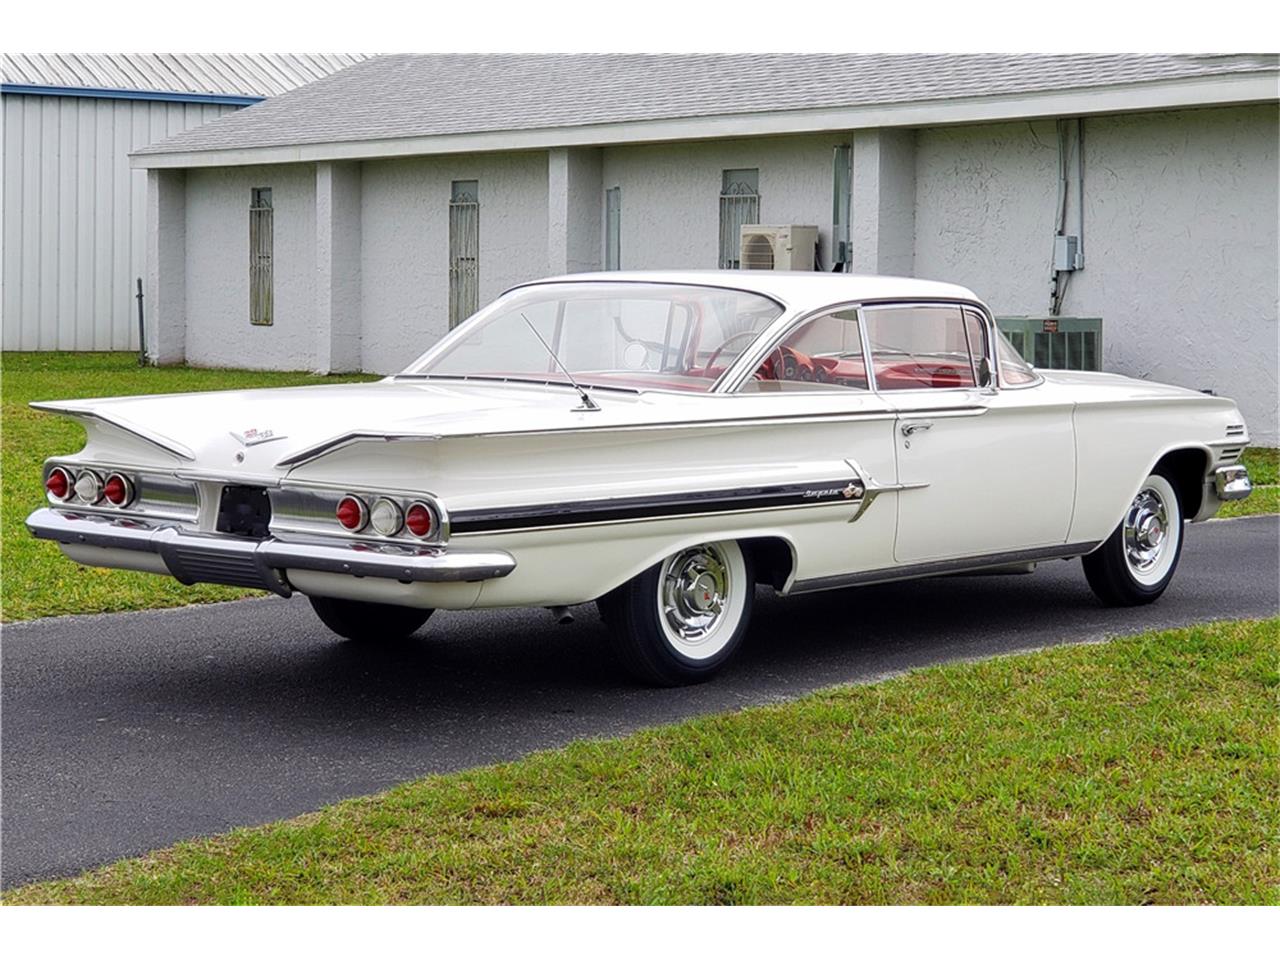 For Sale at Auction: 1960 Chevrolet Impala for sale in West Palm Beach, FL